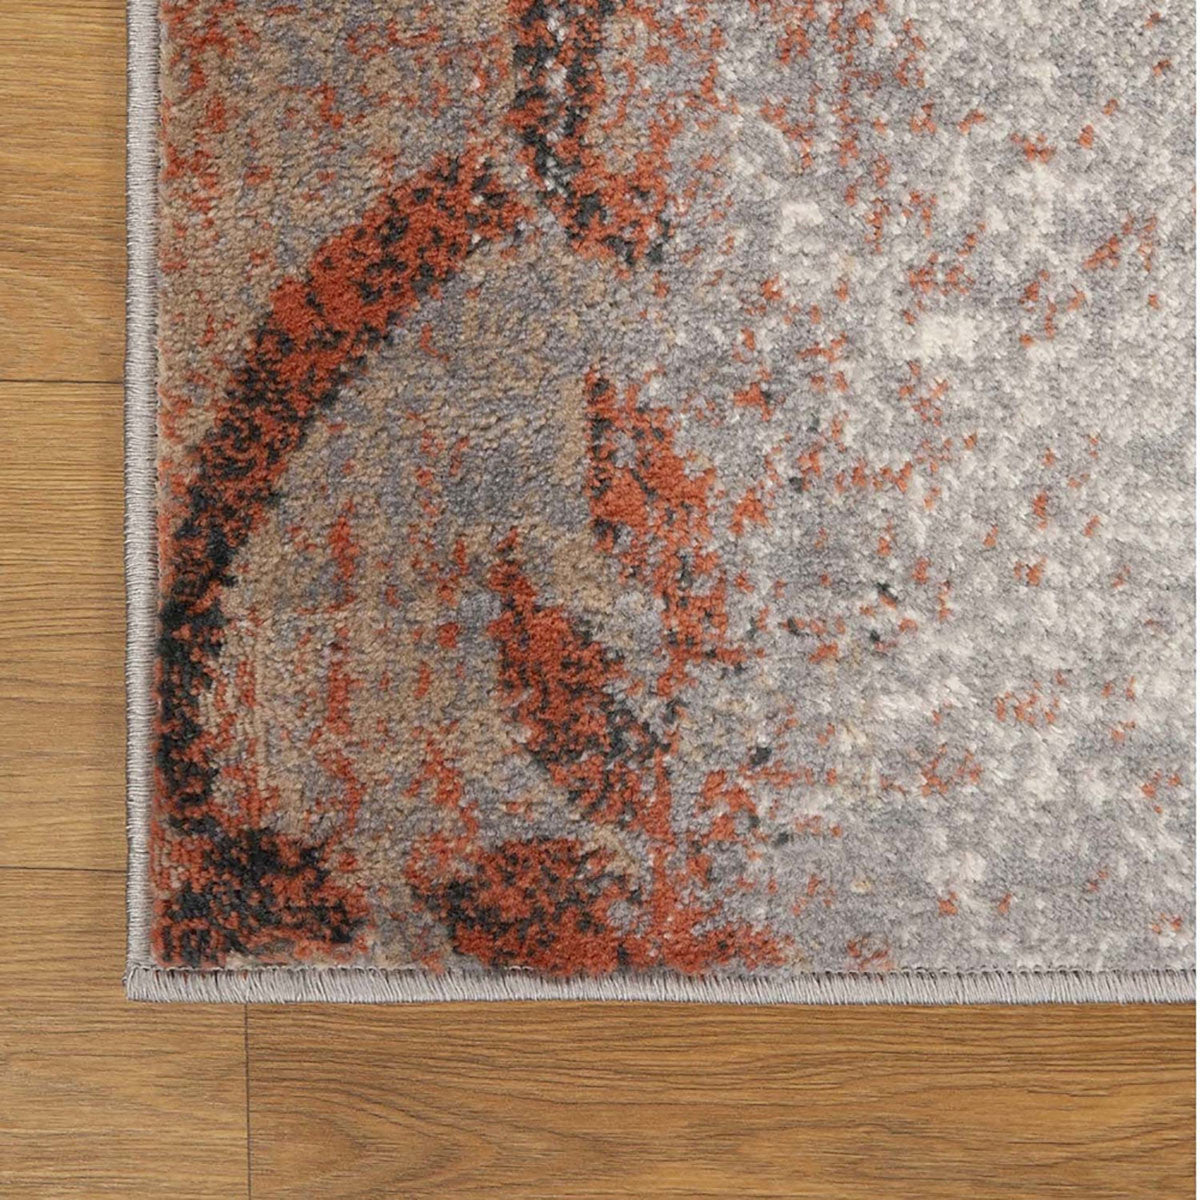 10' Rust And Gray Damask Distressed Stain Resistant Runner Rug